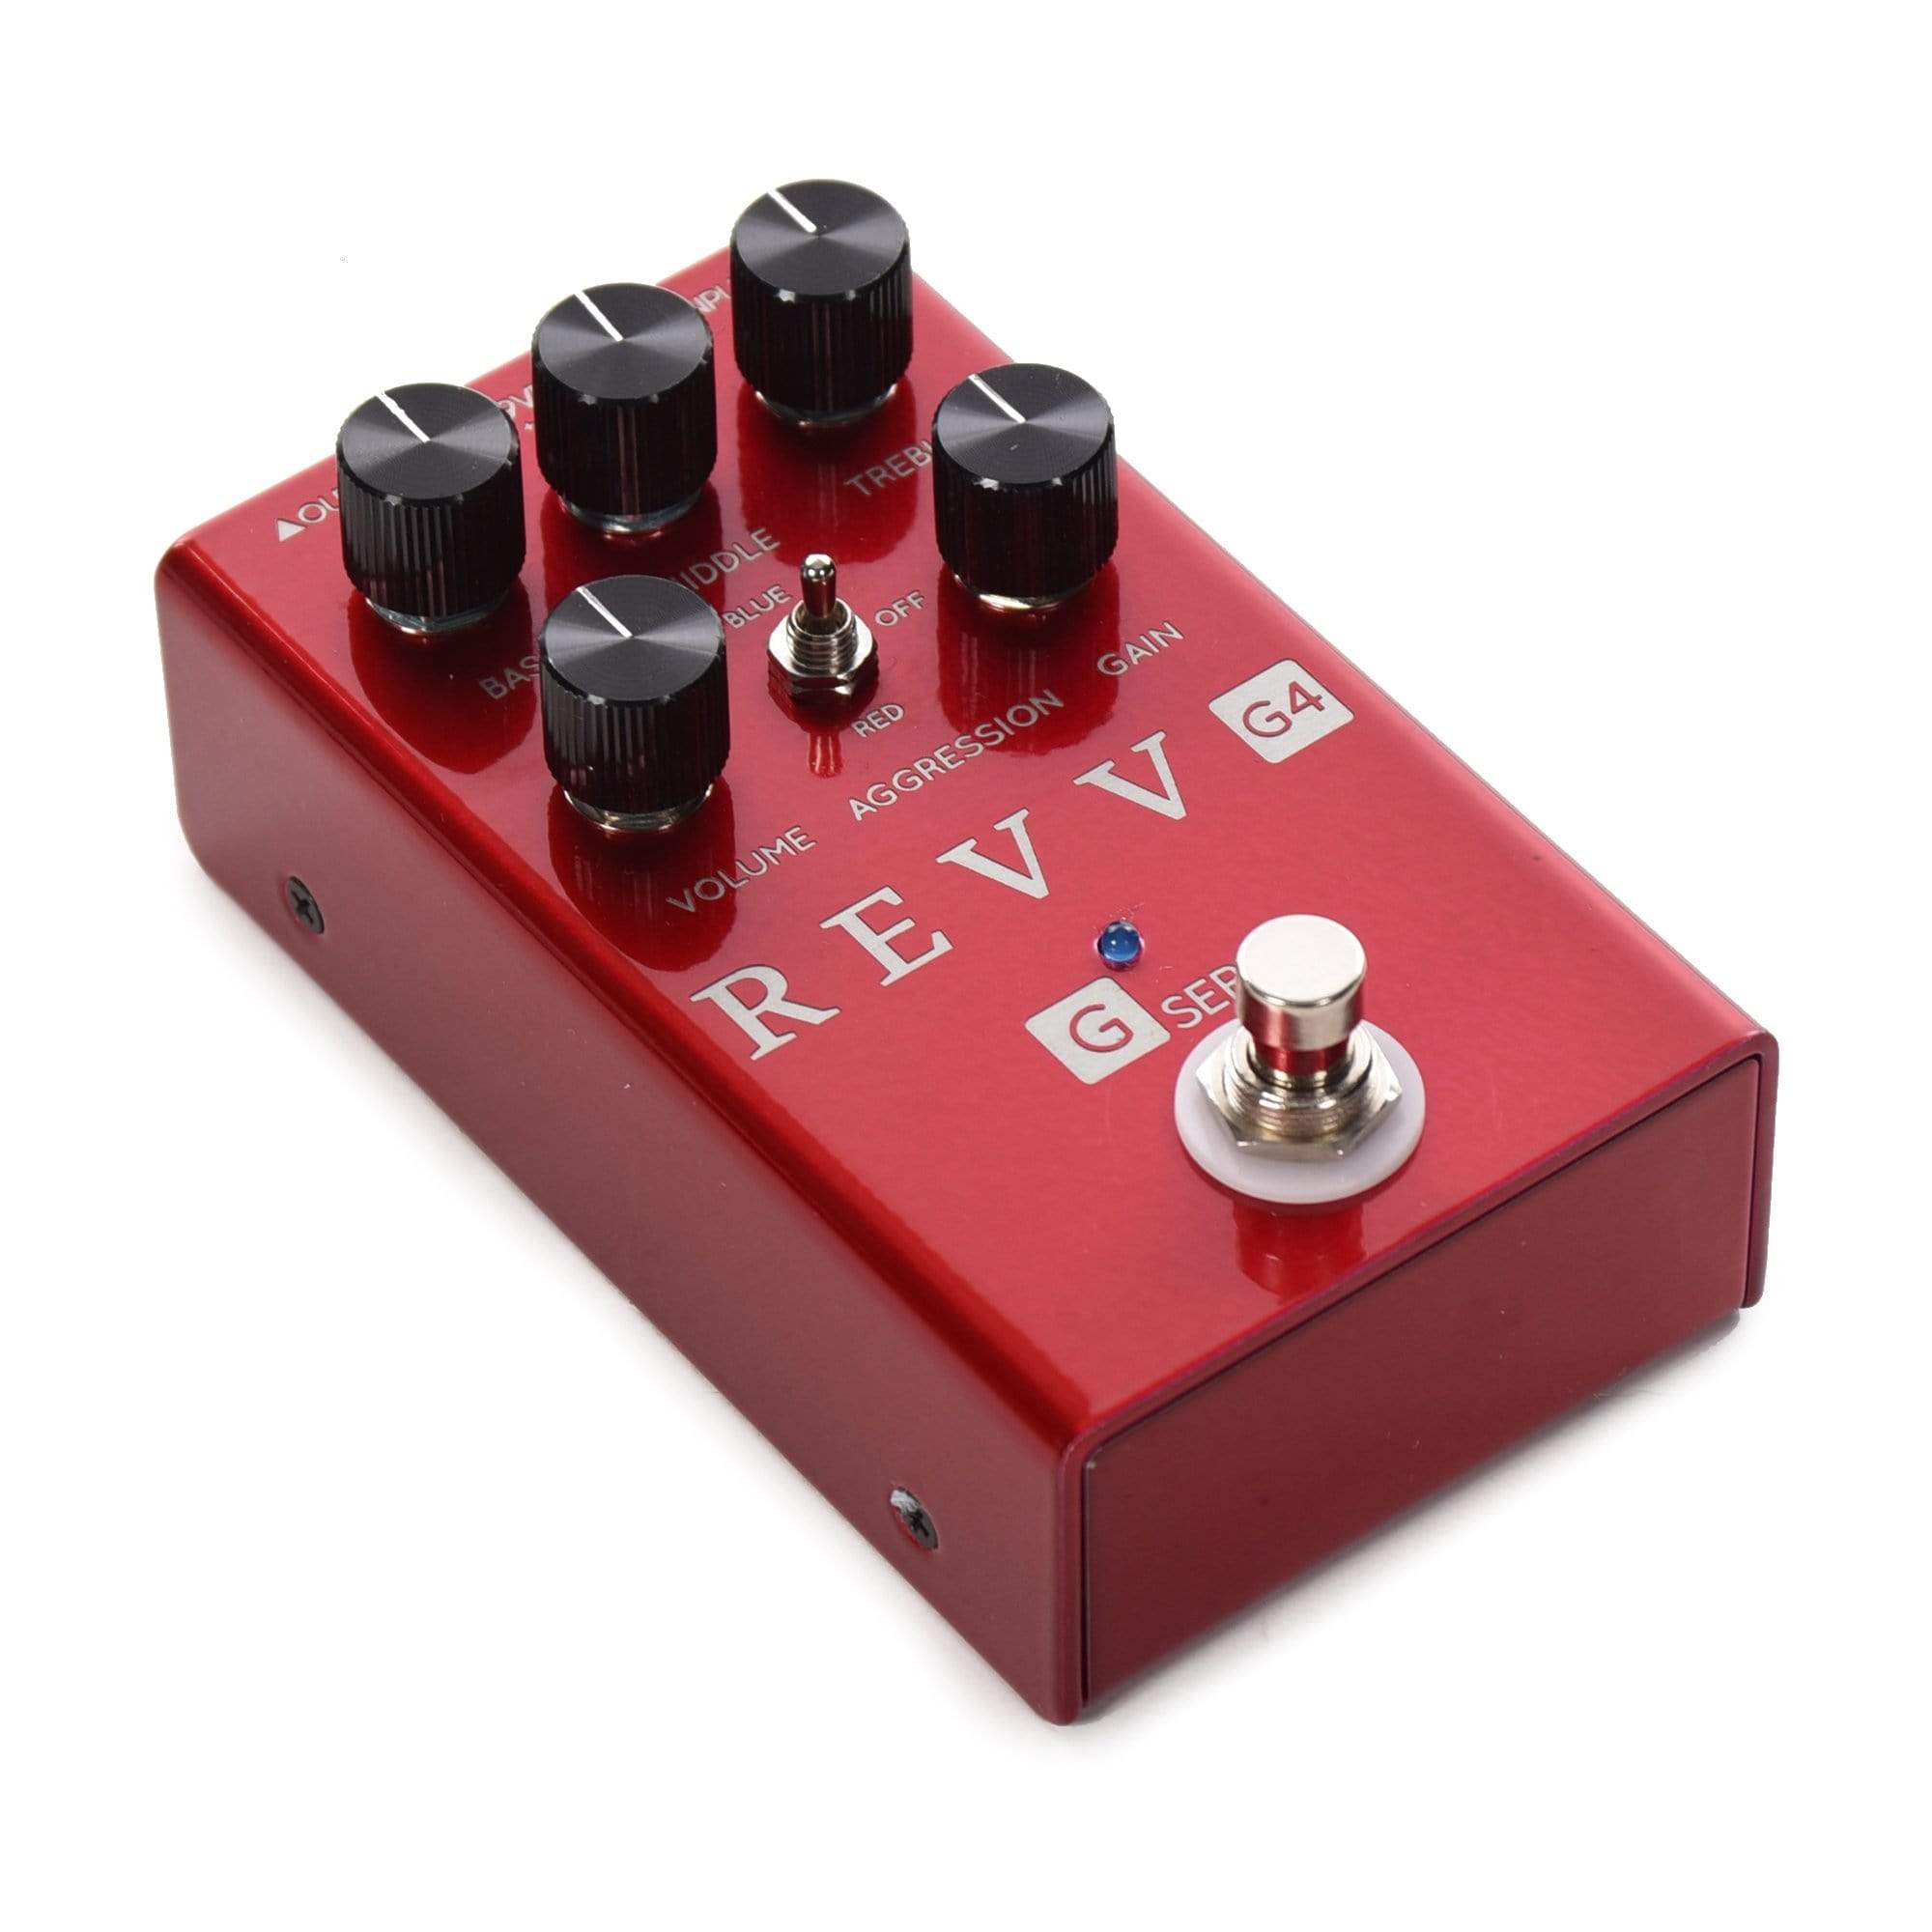 Revv G4 Preamp/Overdrive/Distortion Pedal Red Effects and Pedals / Overdrive and Boost